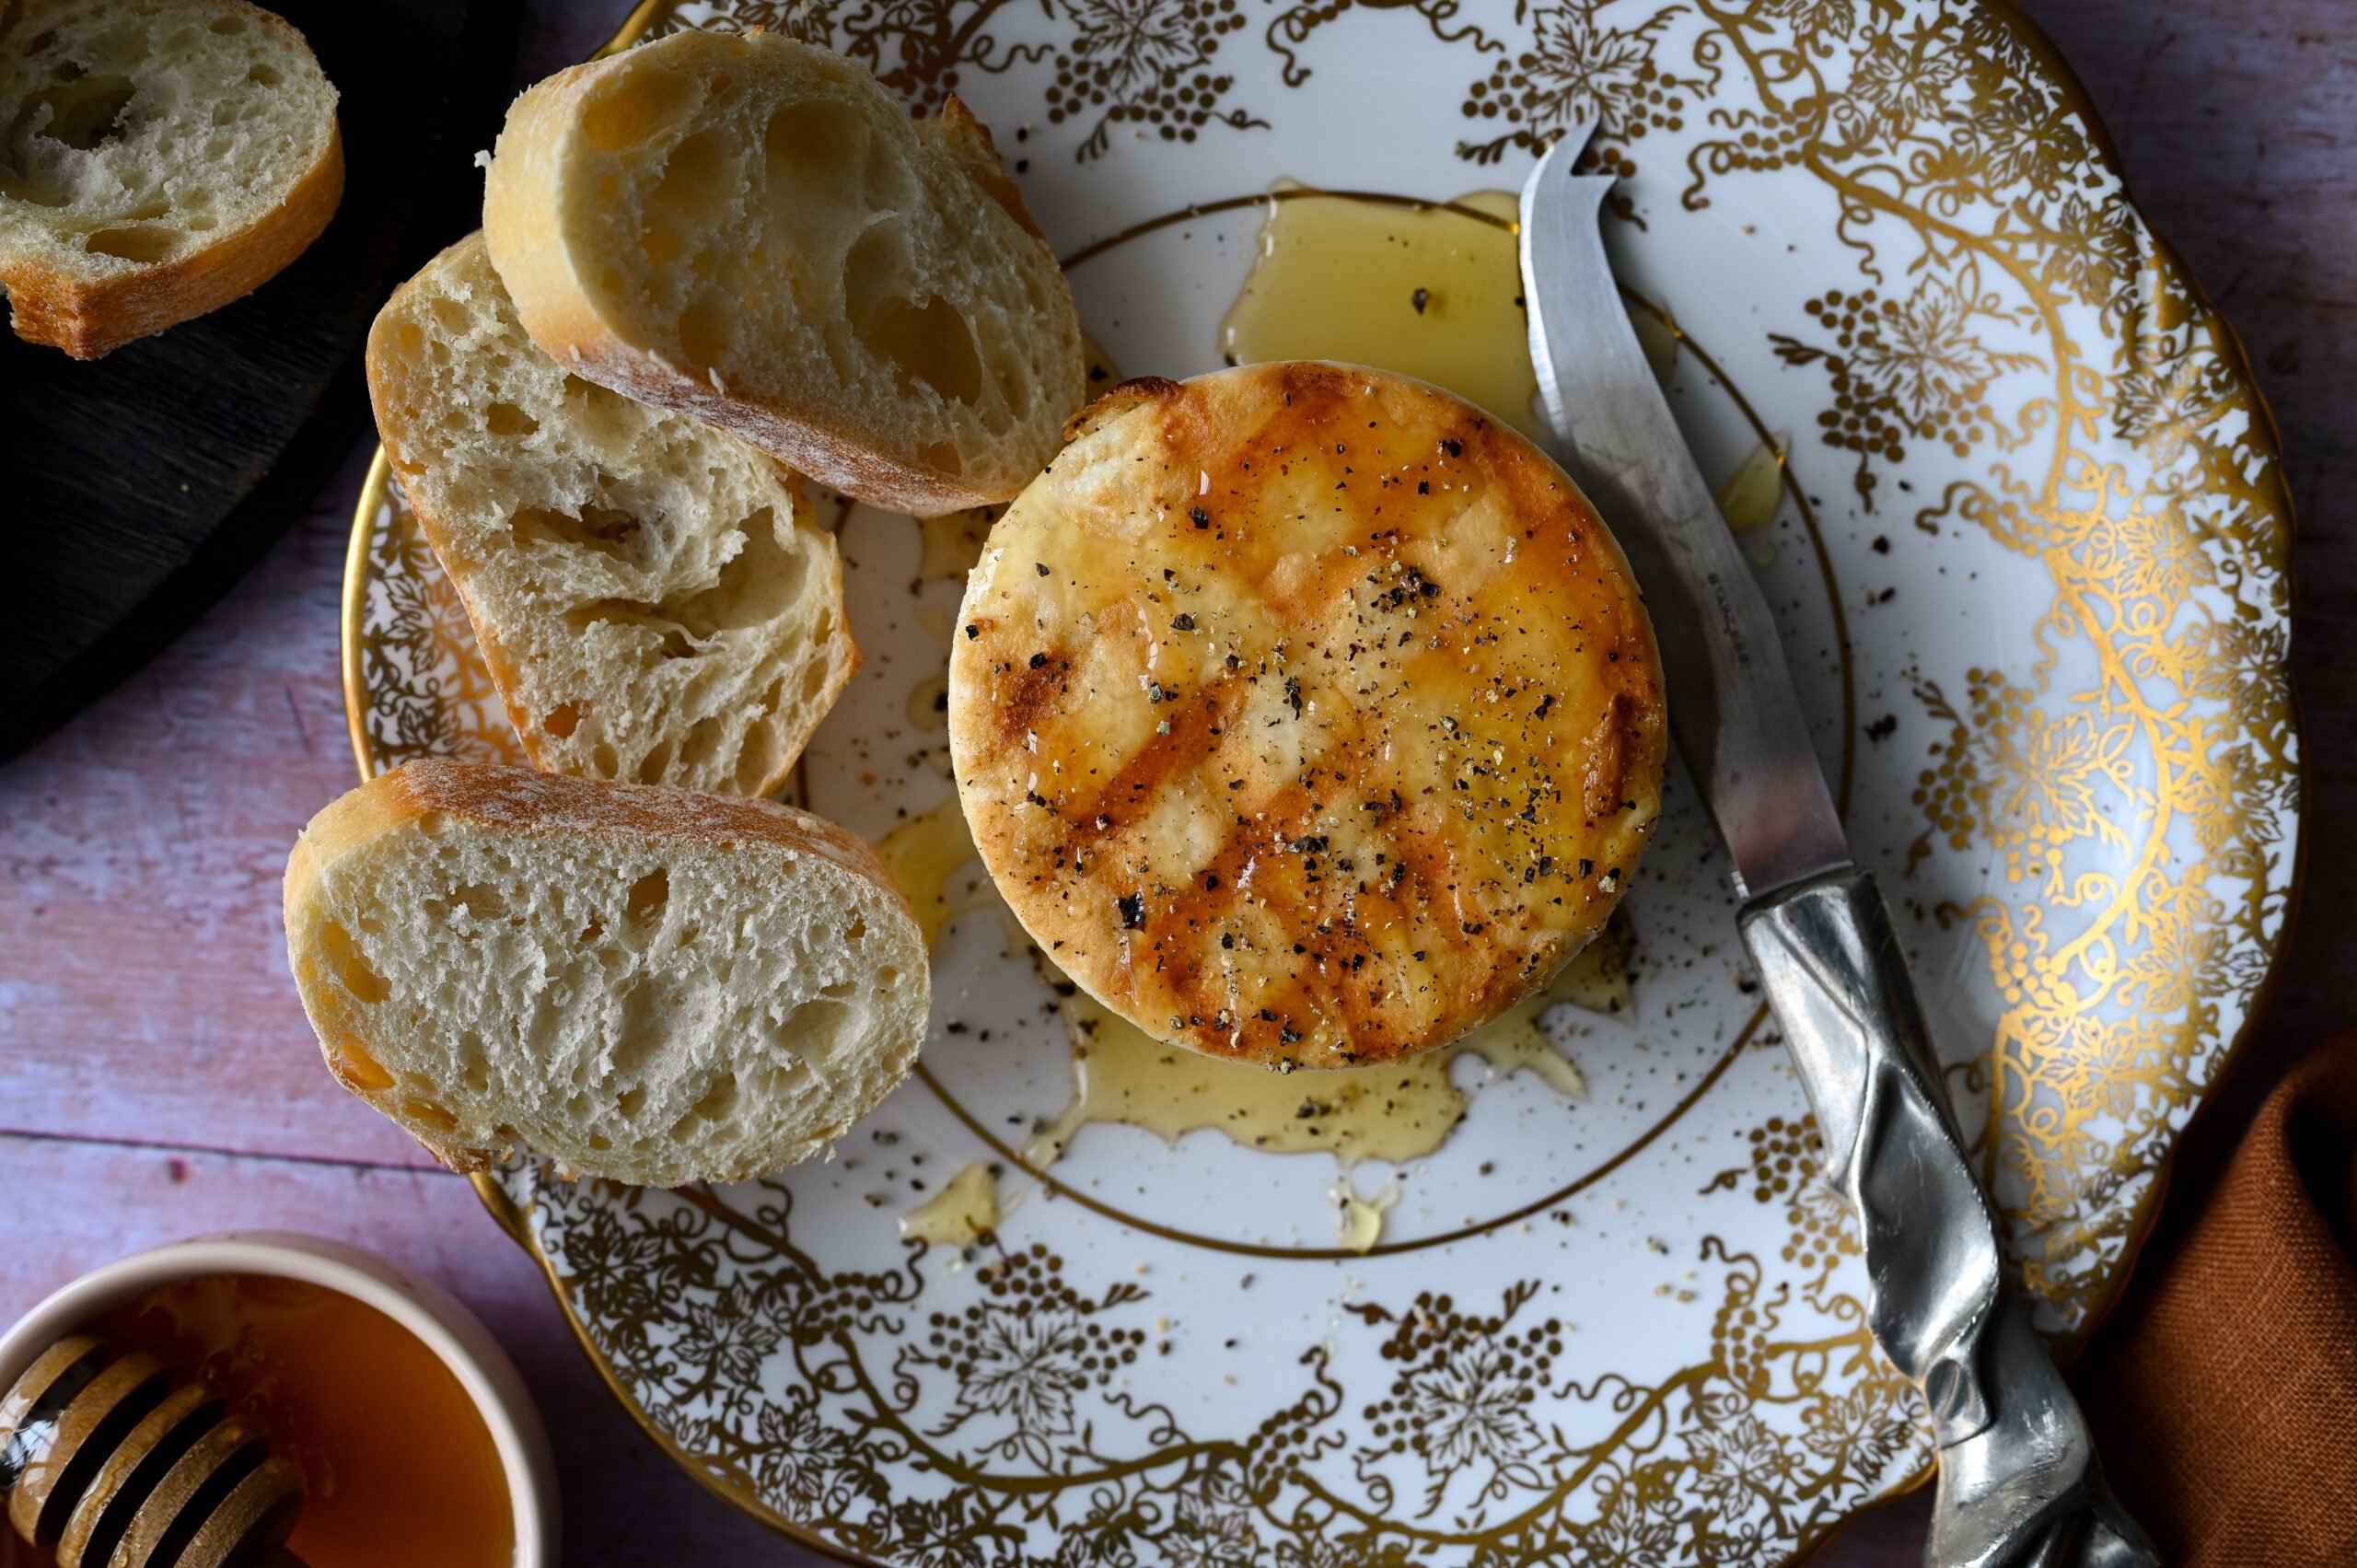 Grilled manouri cheese with honey